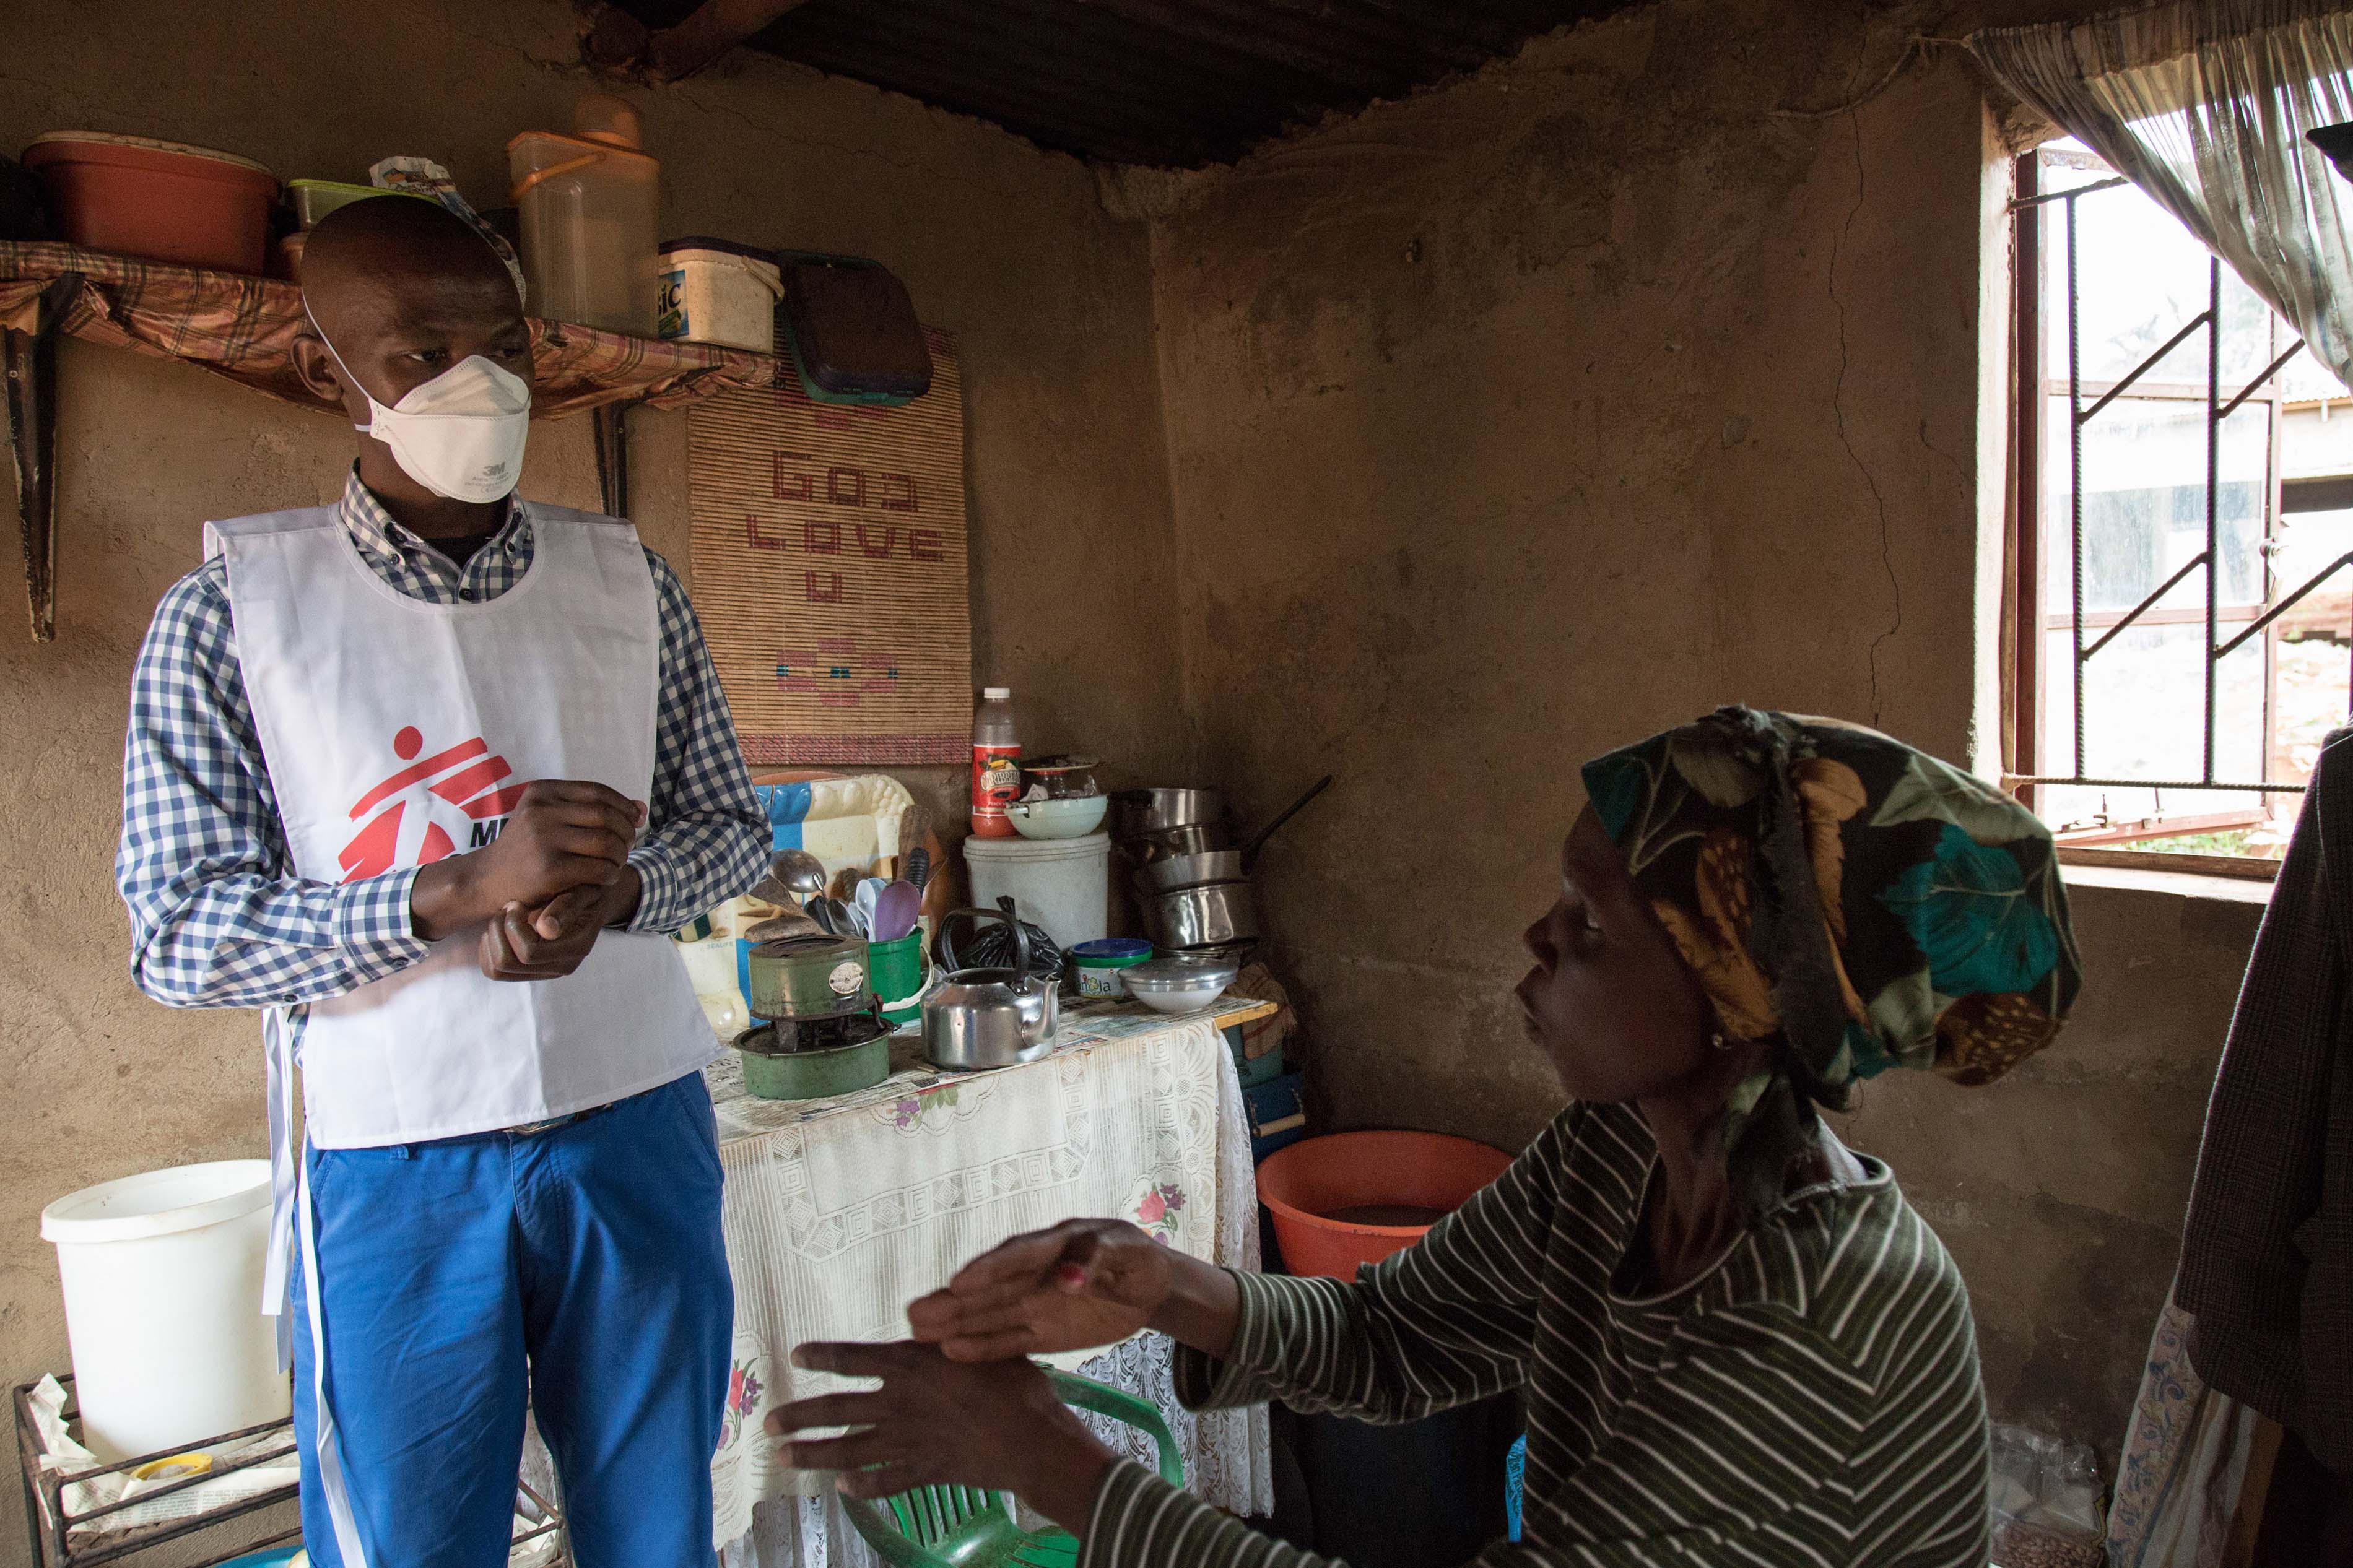 Celumusa Hlatswako, an MSF mobile counsellor, visits Winile, an XDR-TB patient, at home in Manzini Region, Swaziland. 